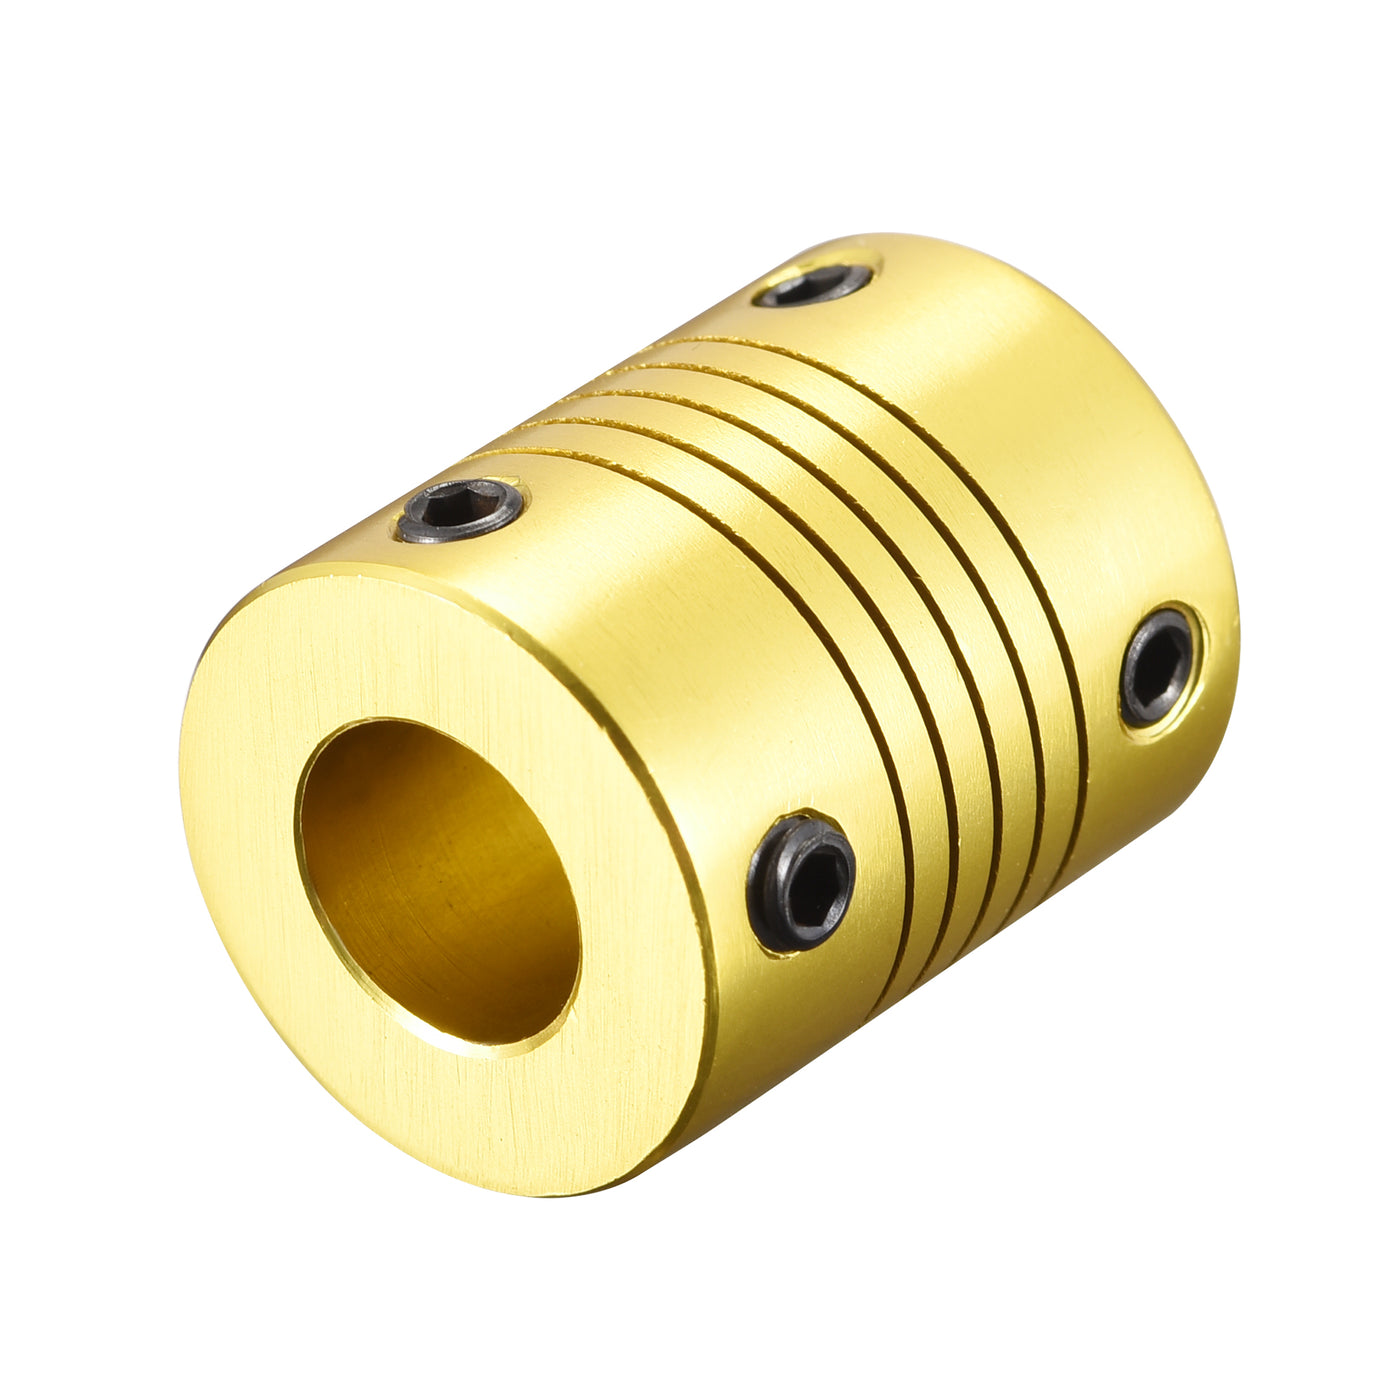 uxcell Uxcell 10mm to 10mm Aluminum Alloy Shaft Coupling Flexible Coupler L25xD20 Golden Tone